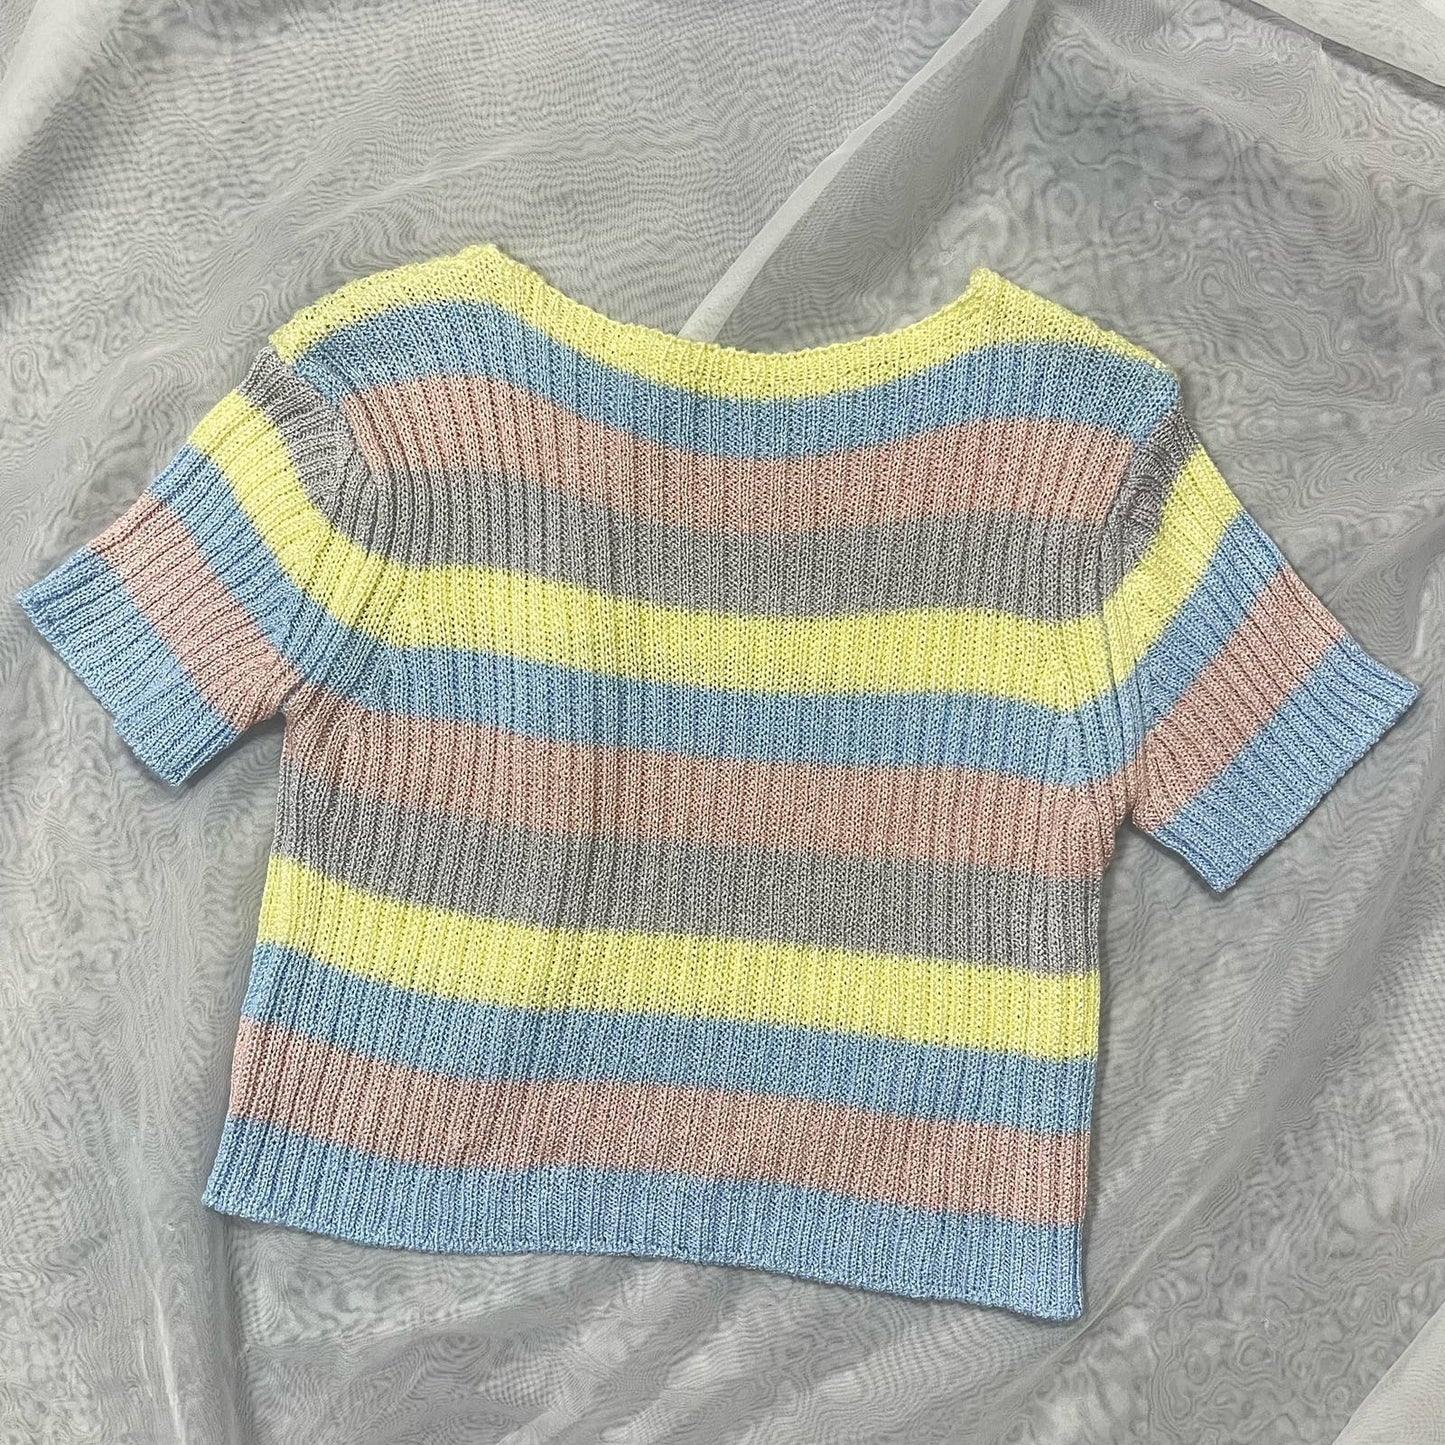 Made in Italy - Vintage Y2K pastel striped knit baby tee (XS-S) Basic cute